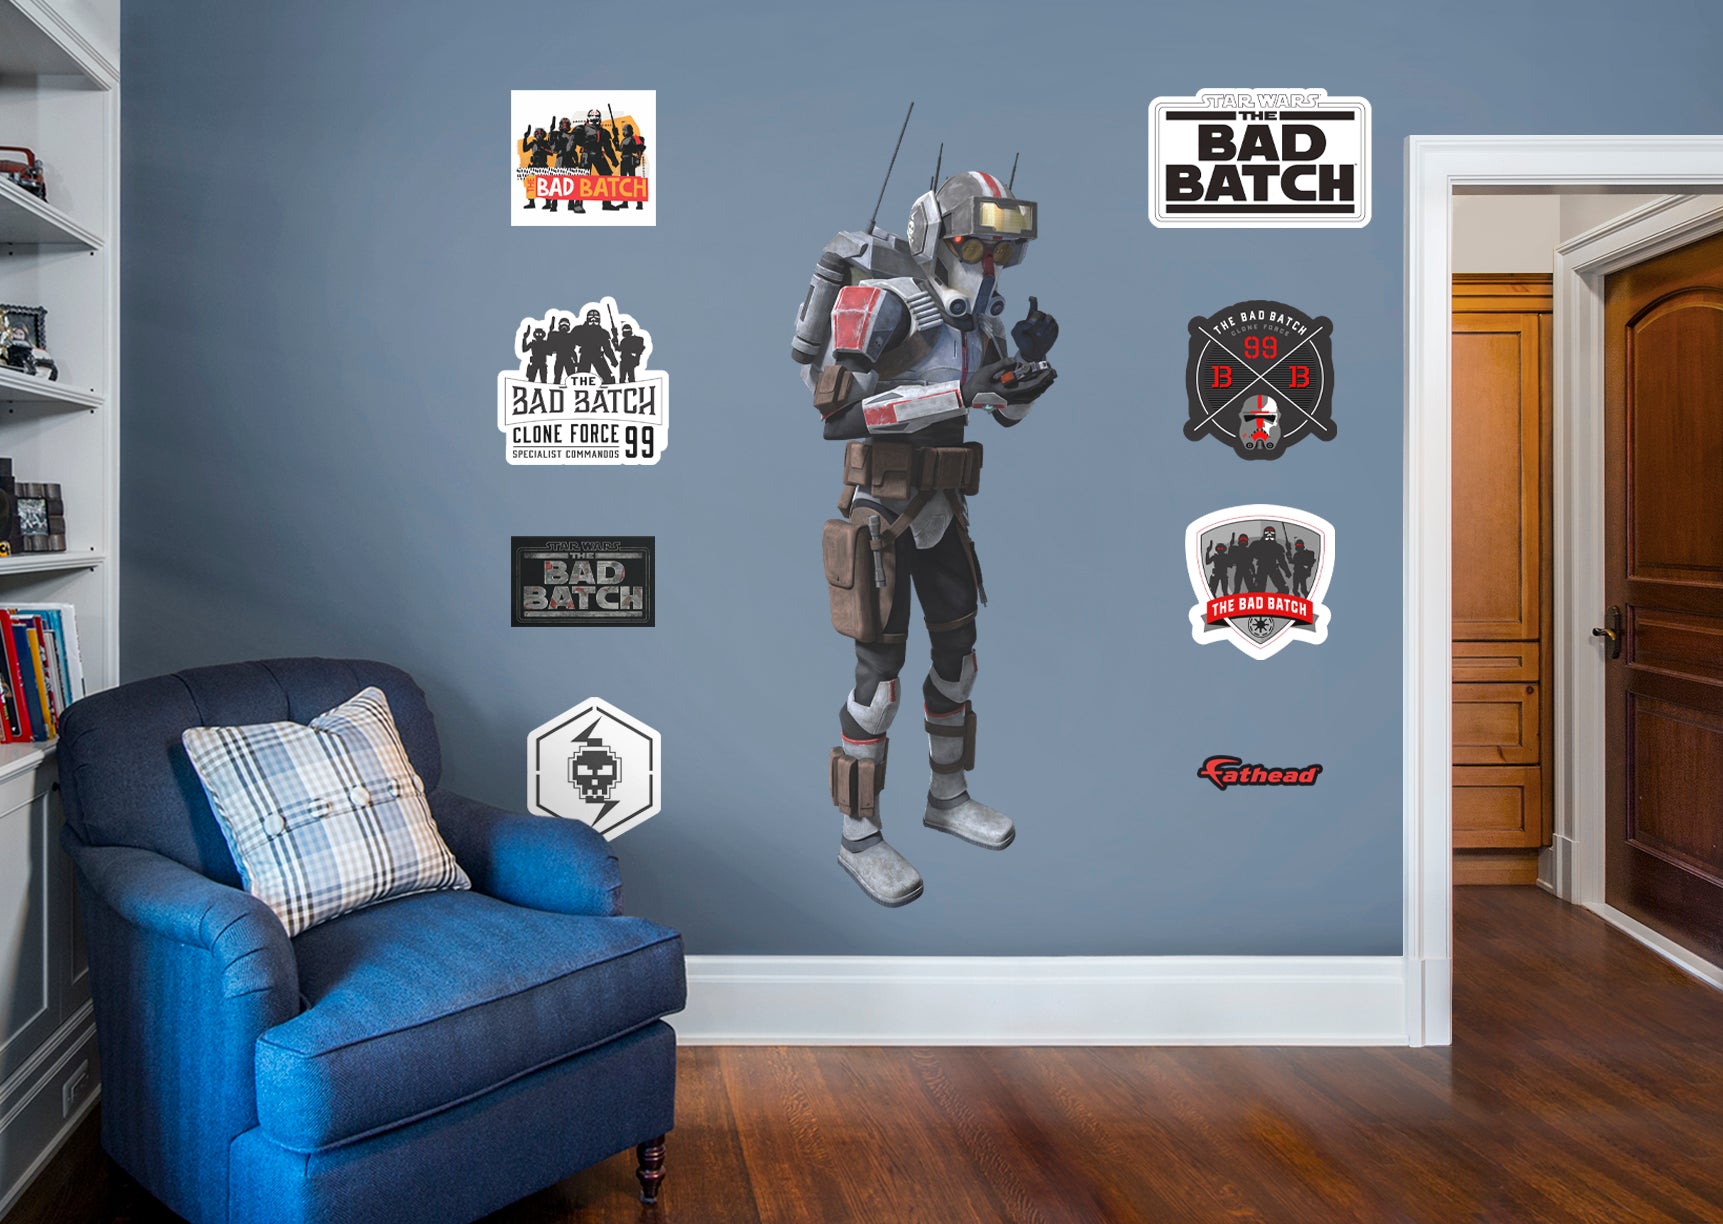 Bad Batch Tech - Officially Licensed Star Wars Removable Wall Decal XL by Fathead | Vinyl